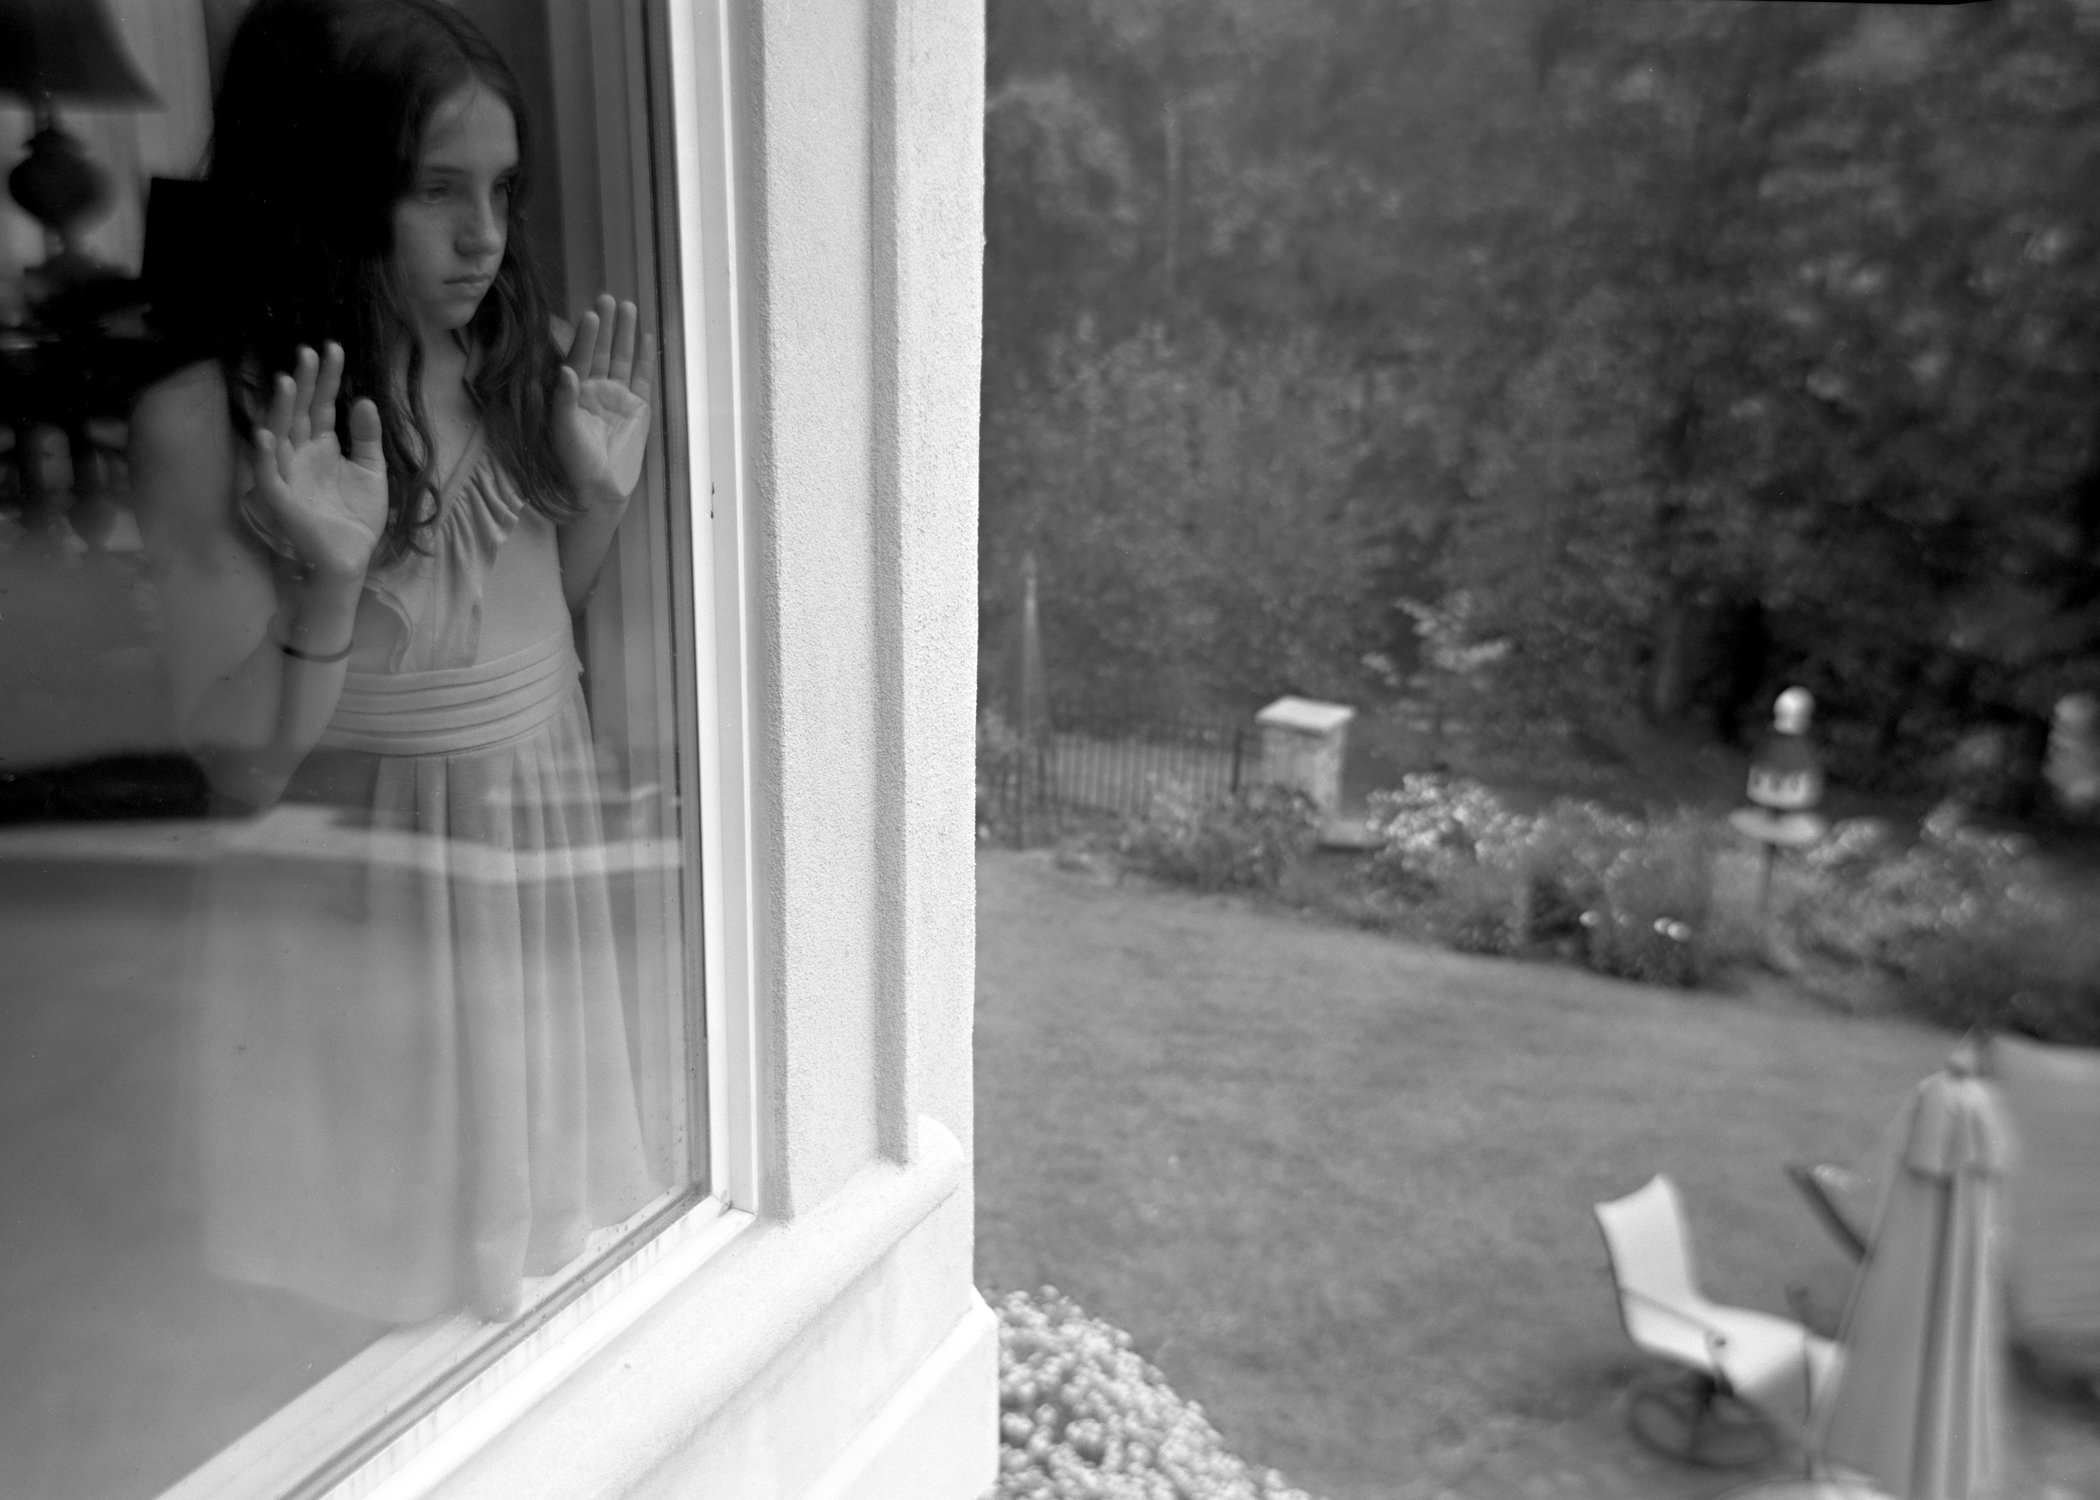  NICOLE LOOKING OUT OF THE WINDOW, 2008  GELATIN SILVER PHOTOGRAPH 